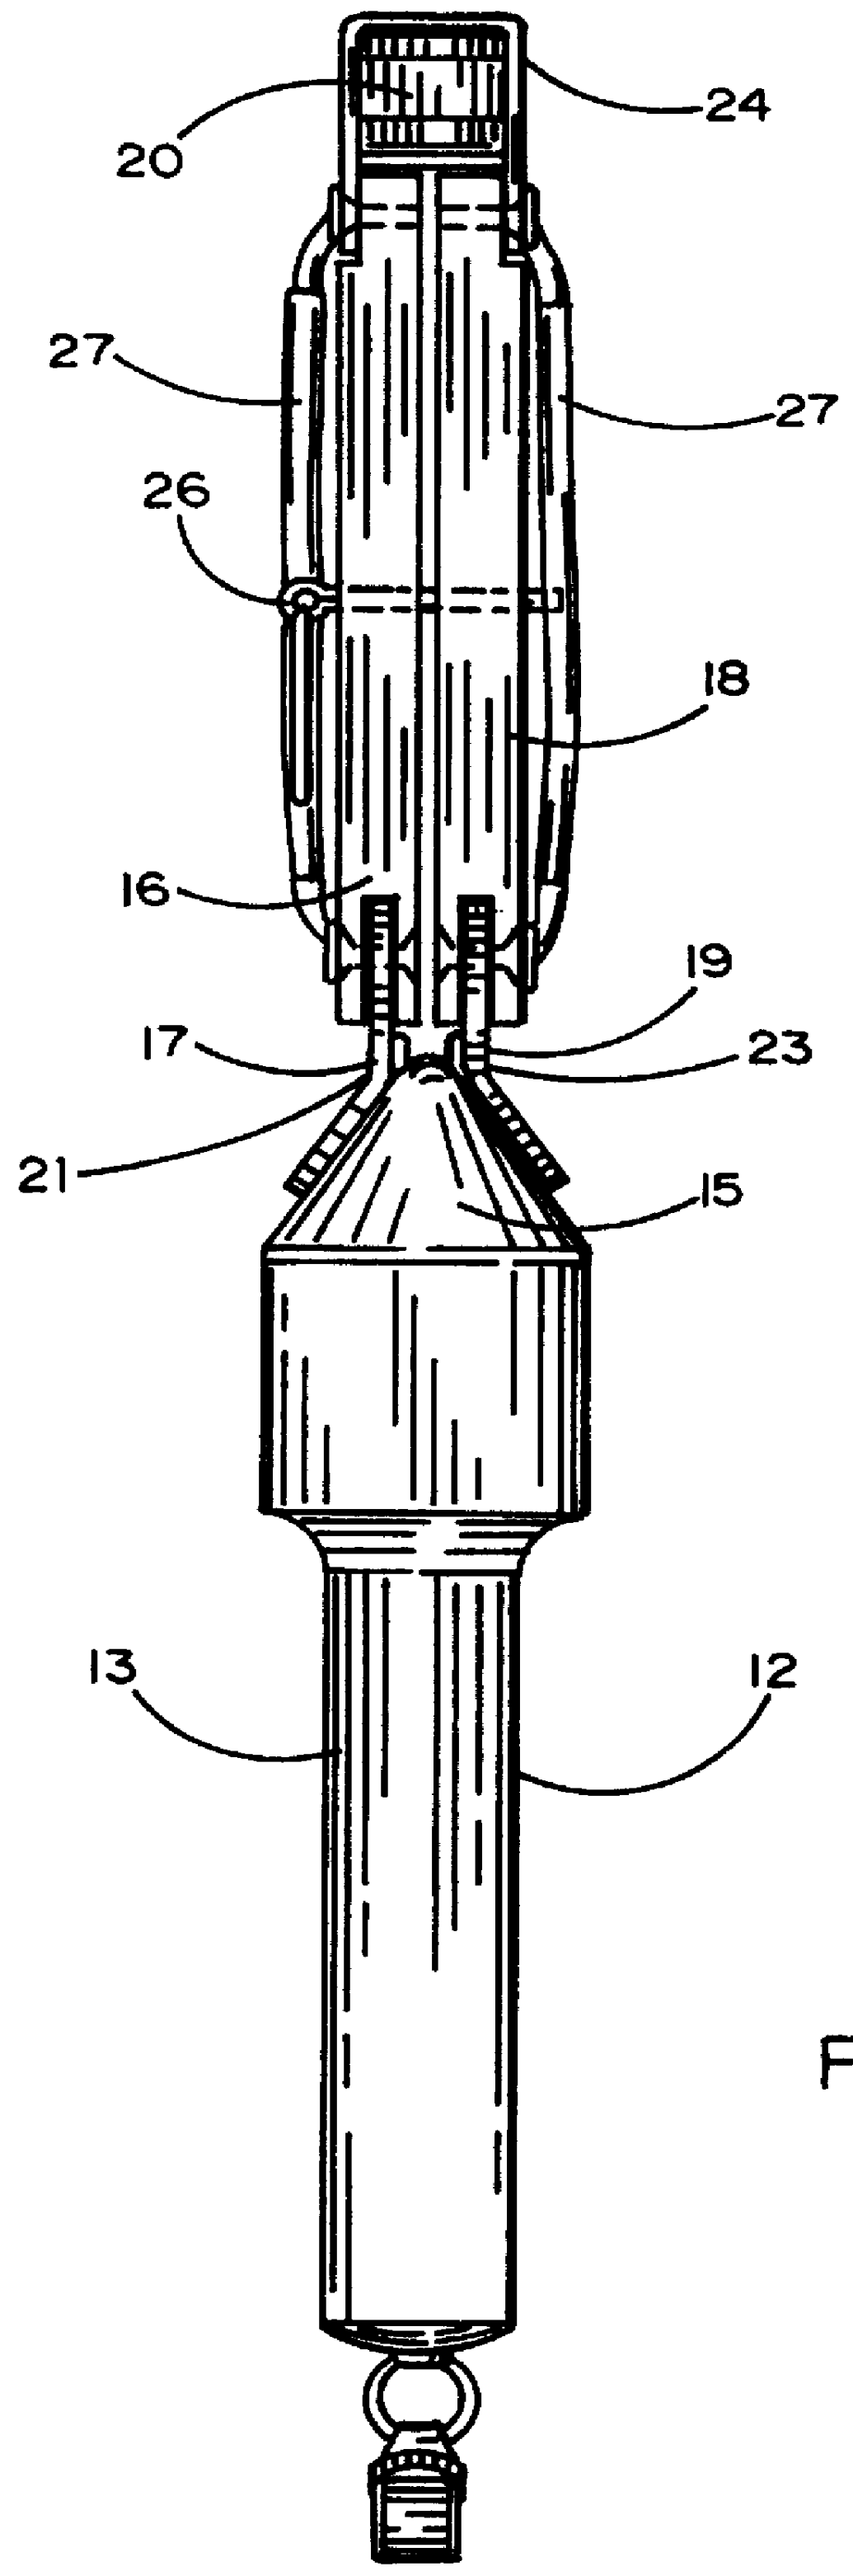 Apparatus for use with non-lethal, electrical discharge weapons